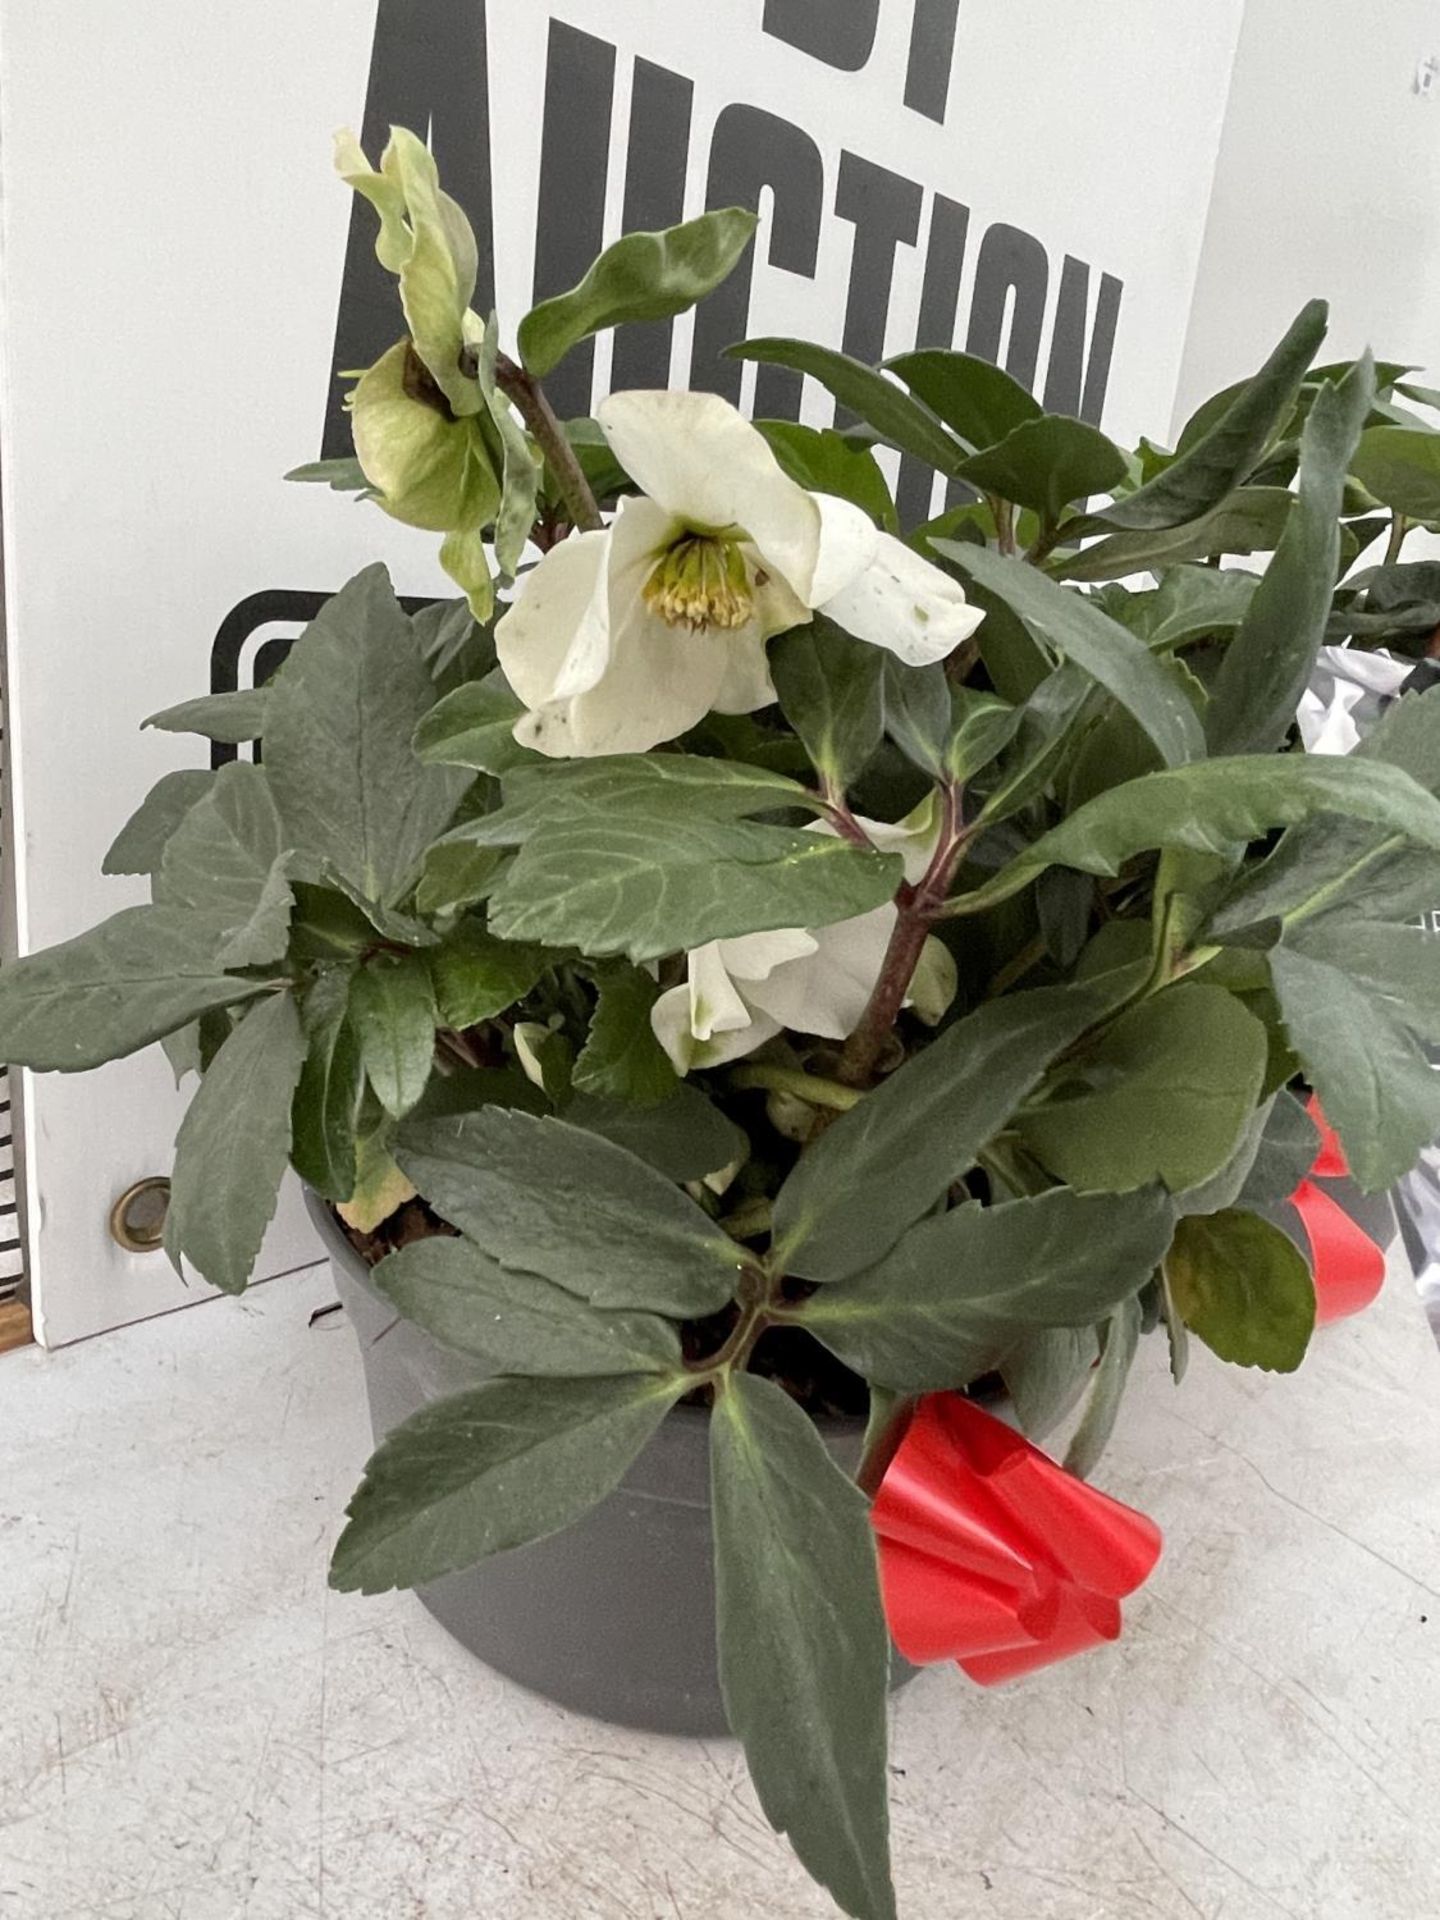 TWO HELLEBOROUS WHITE NIGER CHRISTMAS CAROL IN A 3 LTR BOWL + VAT TO BE SOLD FOR THE TWO - Image 6 of 8